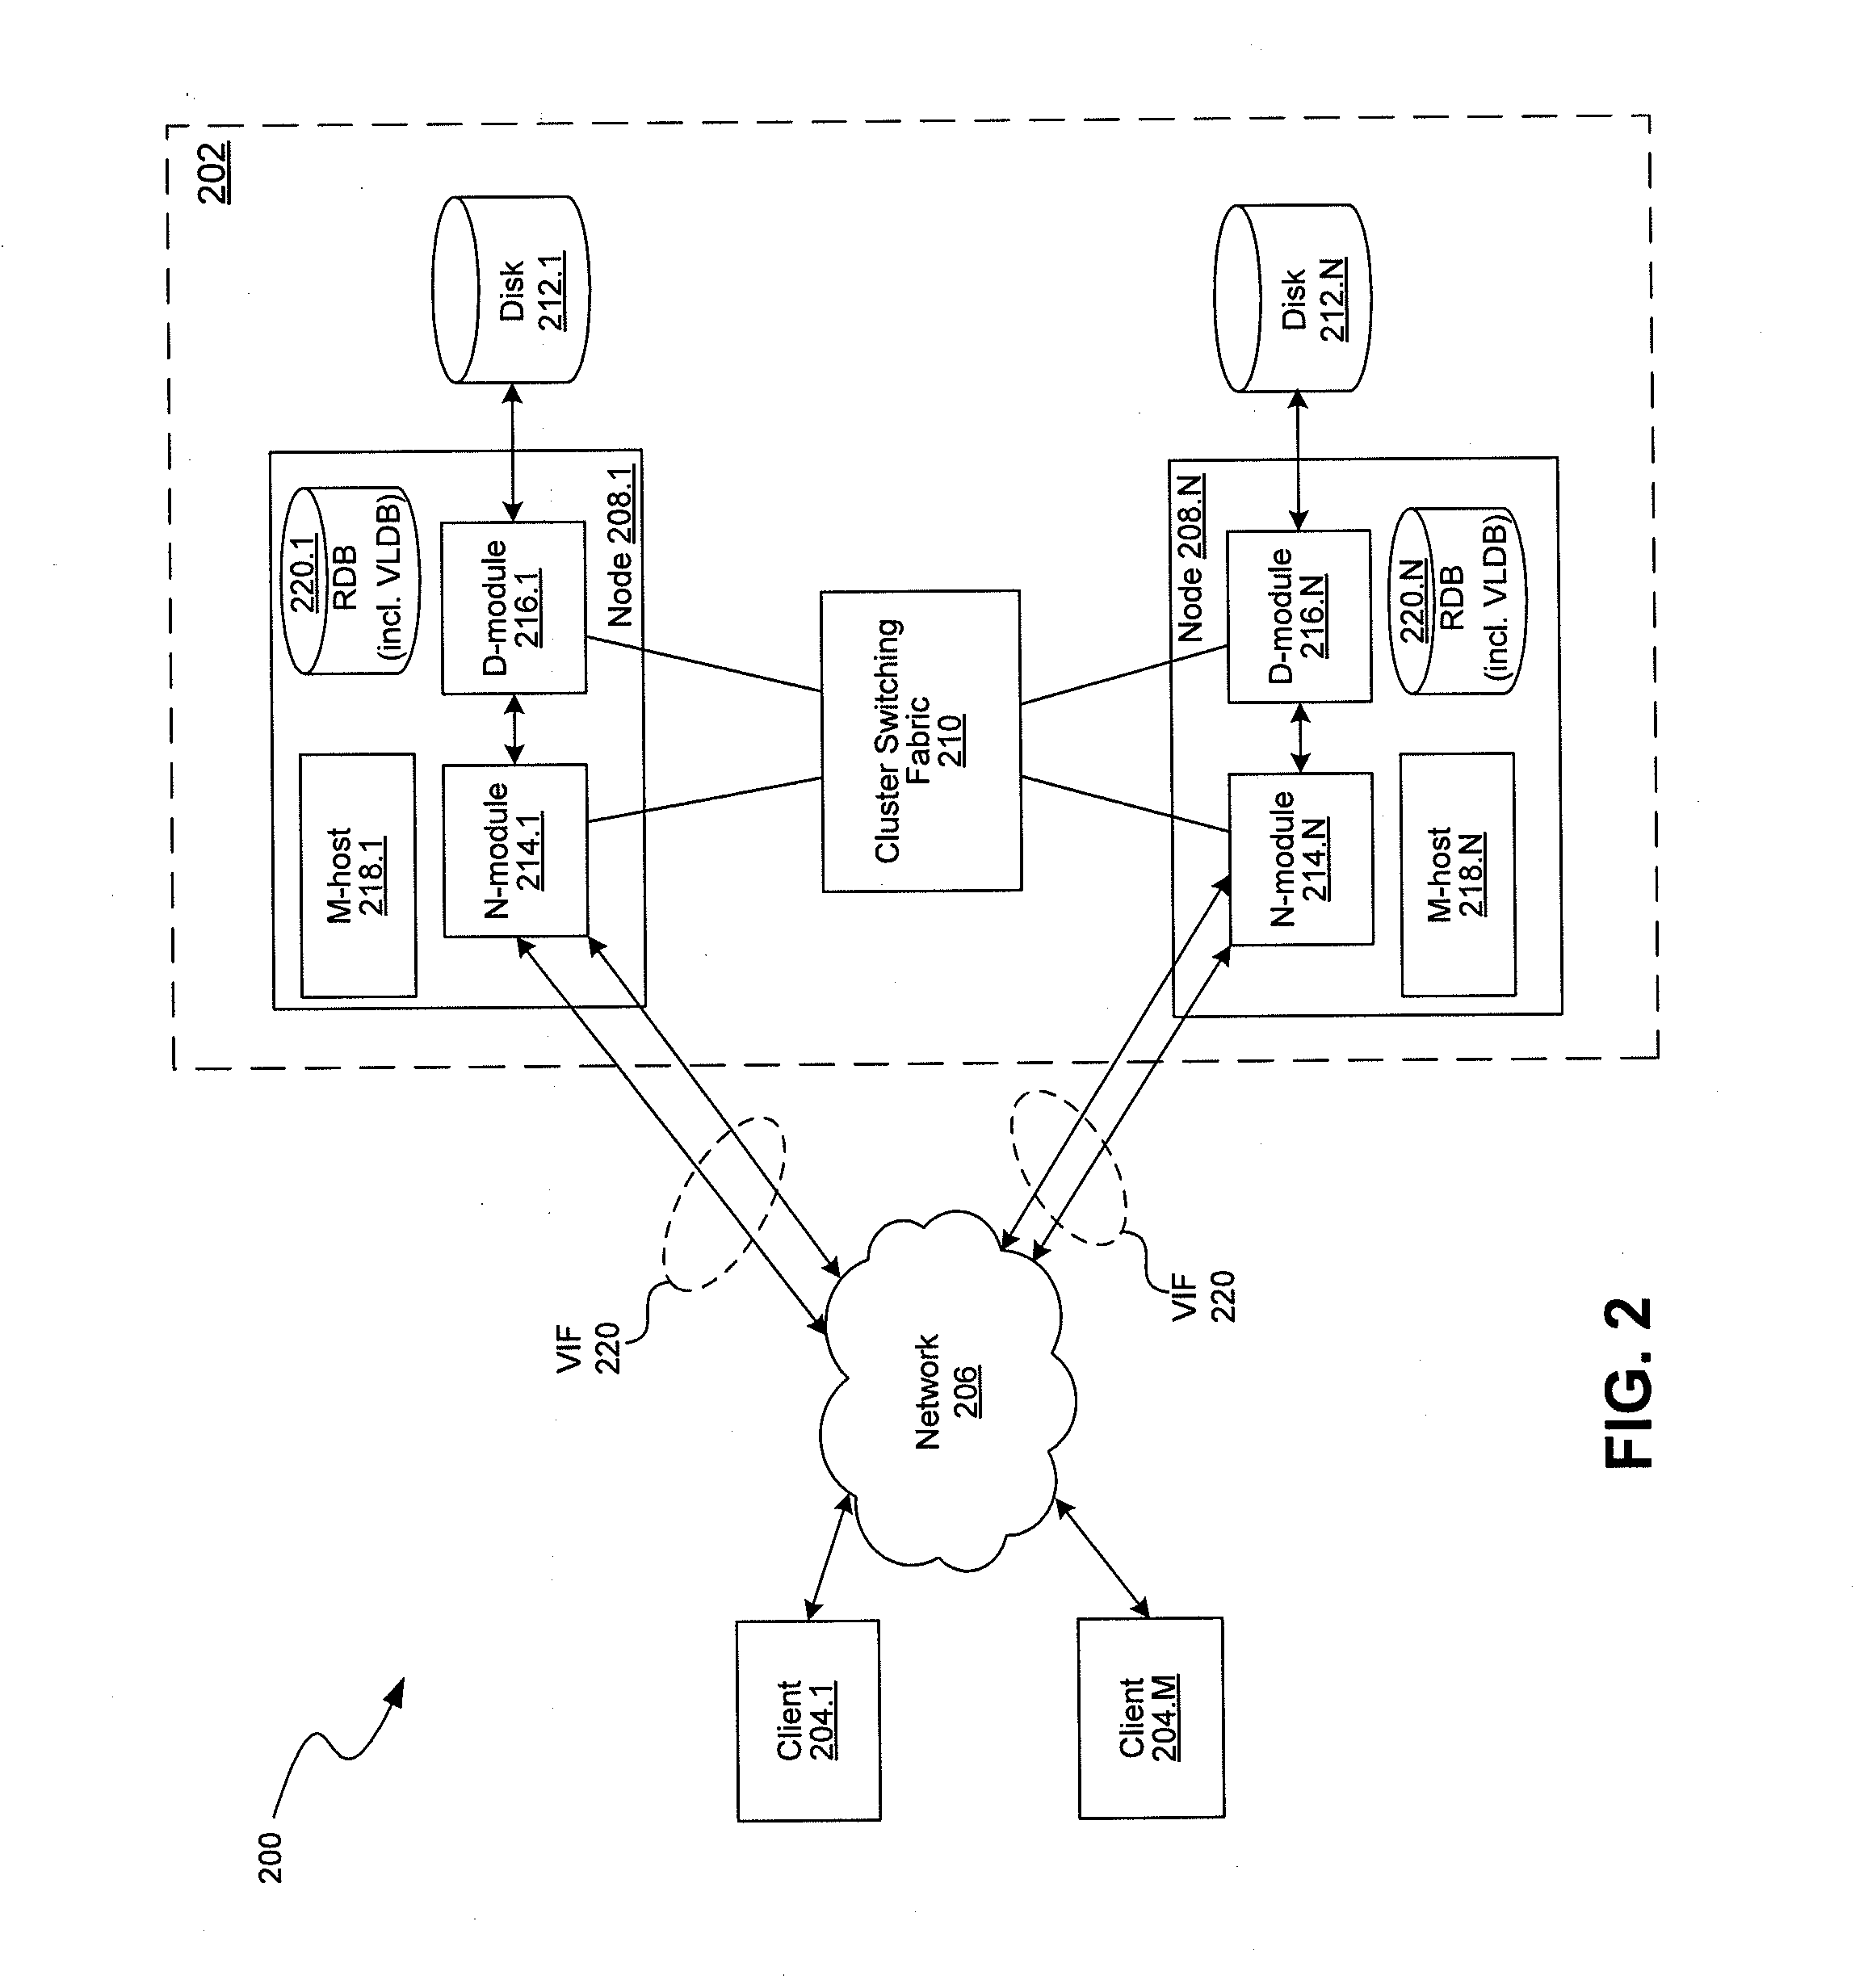 Methods and systems for providing a unified namespace for multiple network protocols